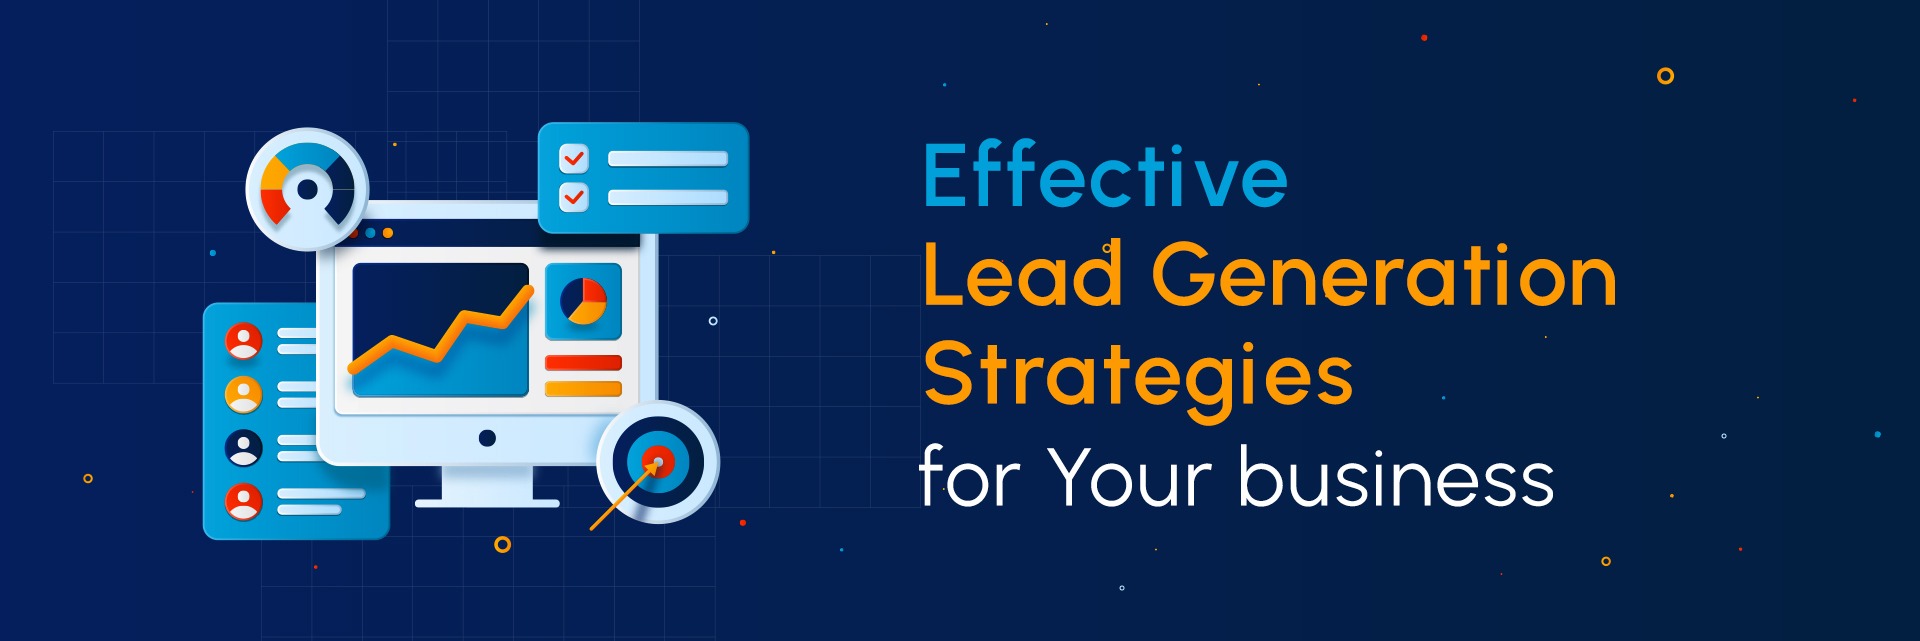 How to Implement Effective Lead Generation Strategies for Your Business?